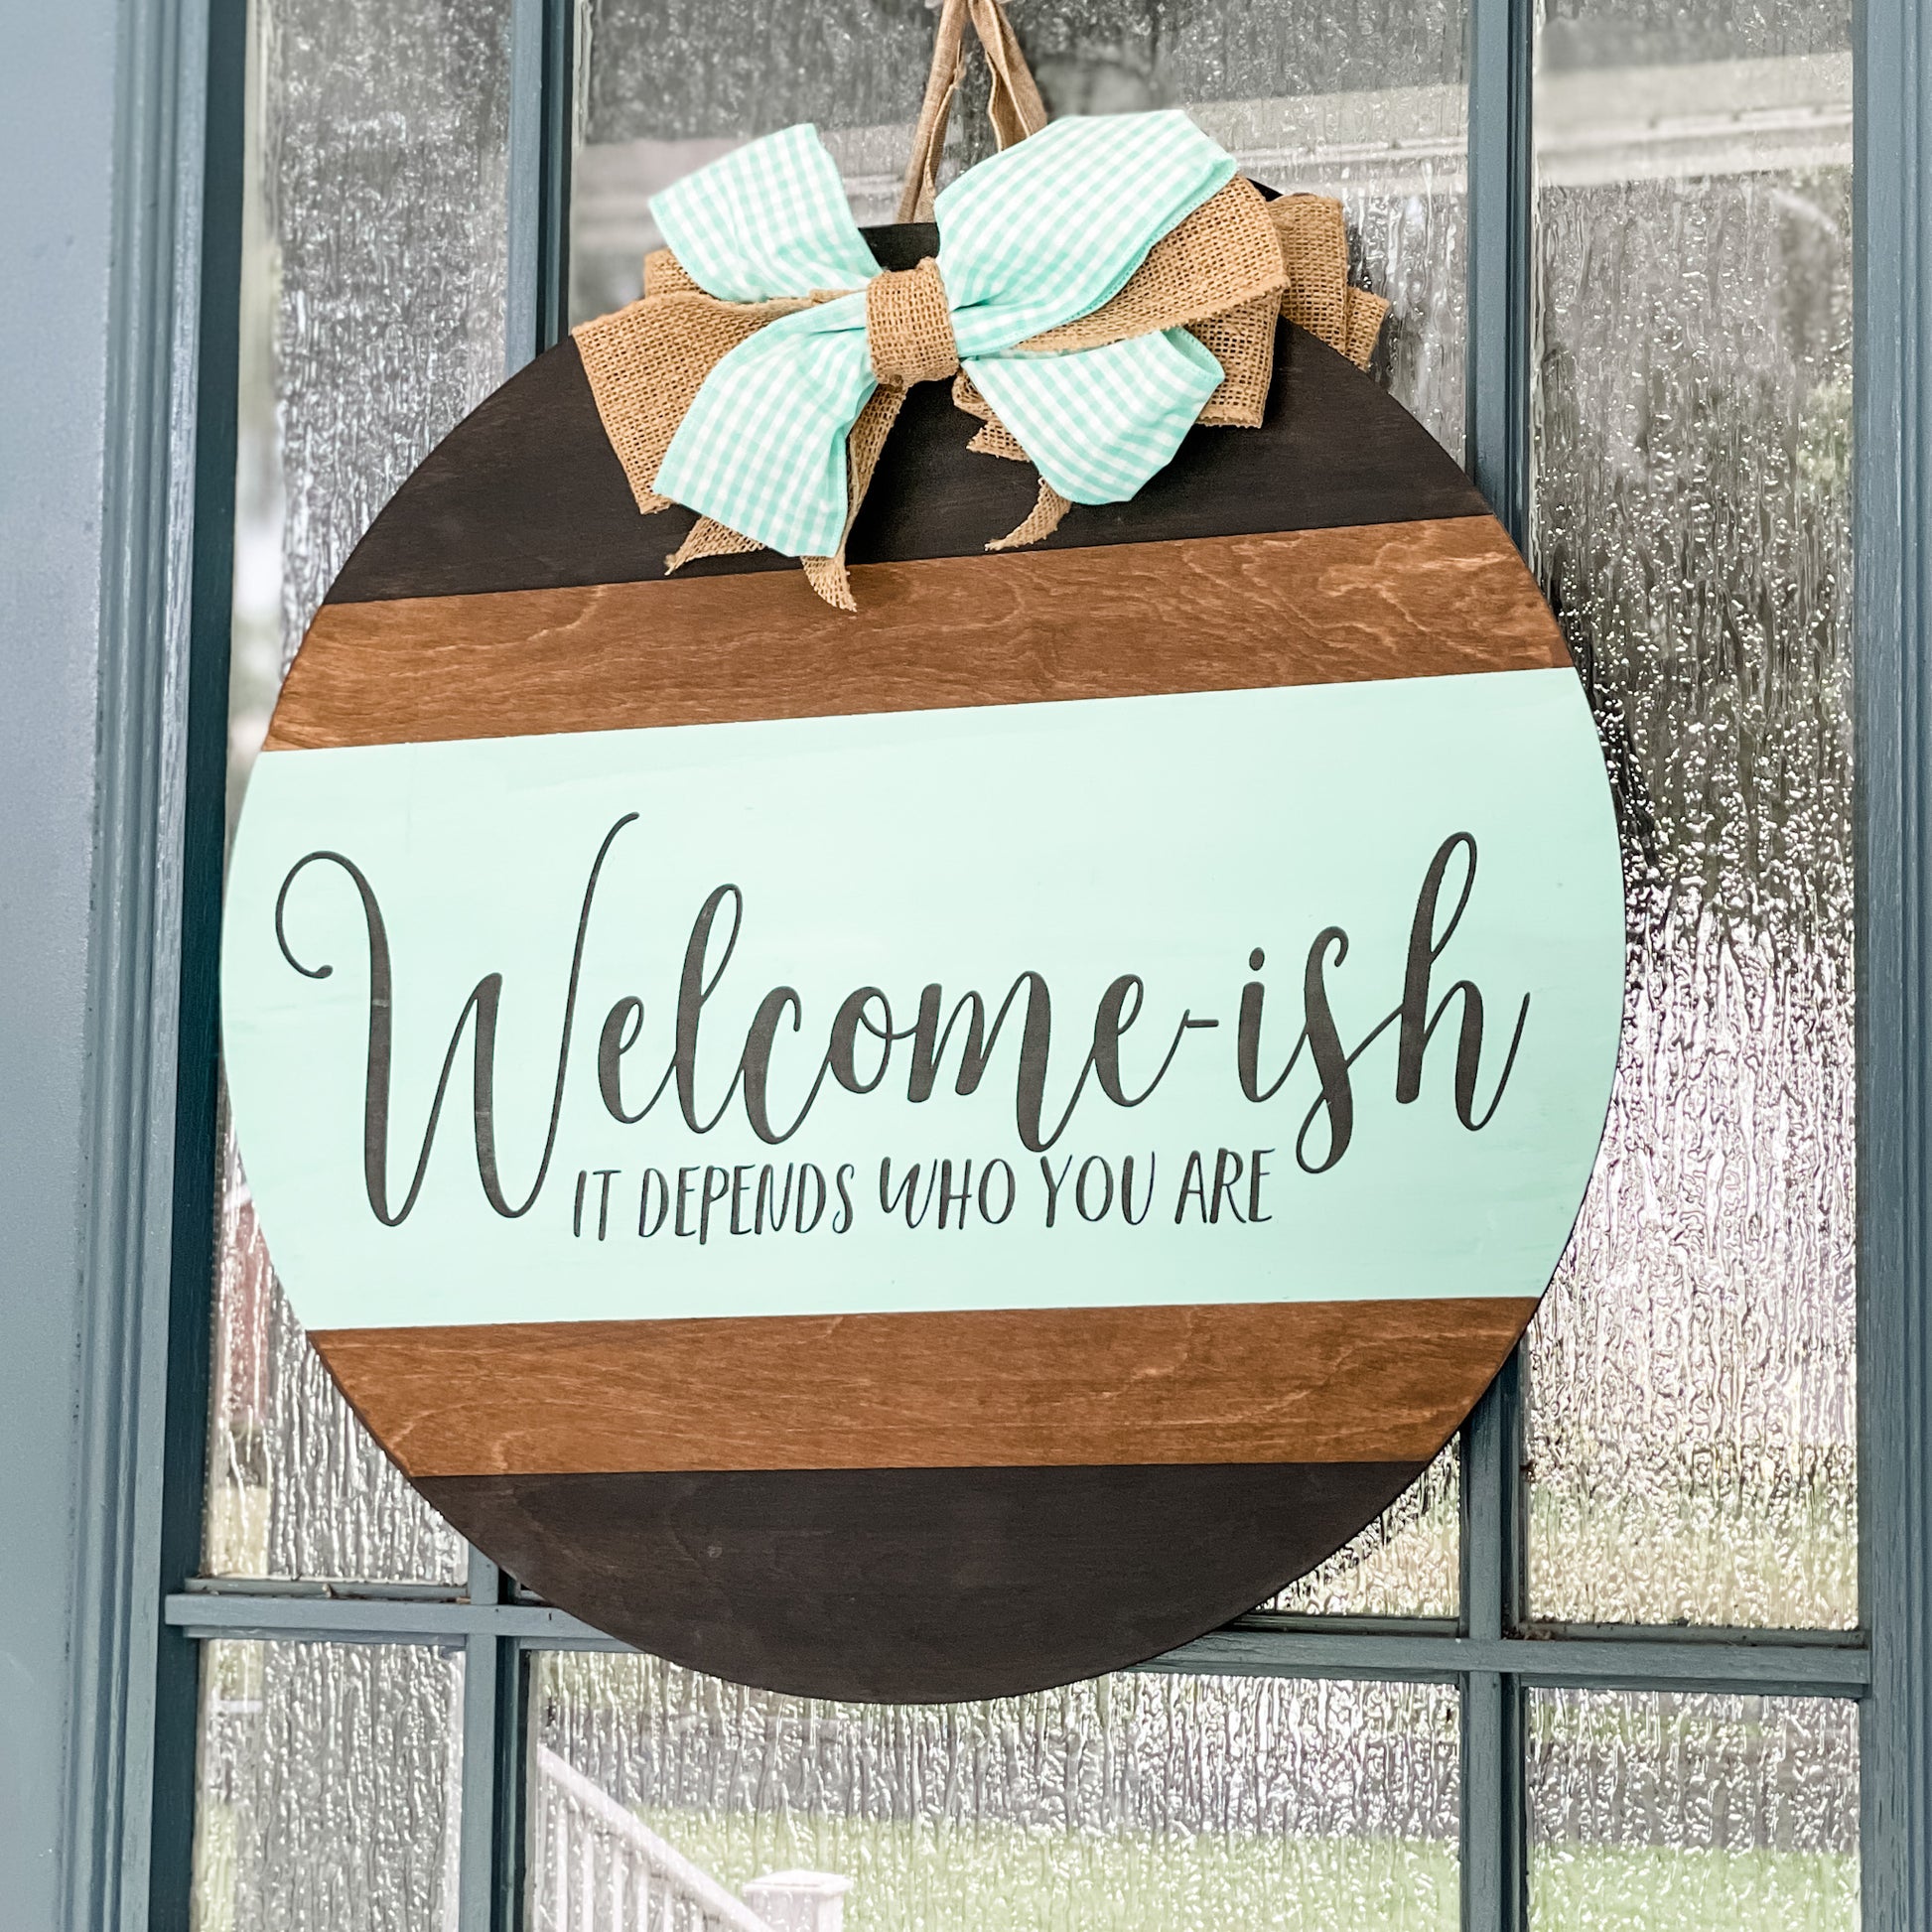 Welcome-ish Depends on who you are: DOOR HANGER DESIGN - Paisley Grace Makery